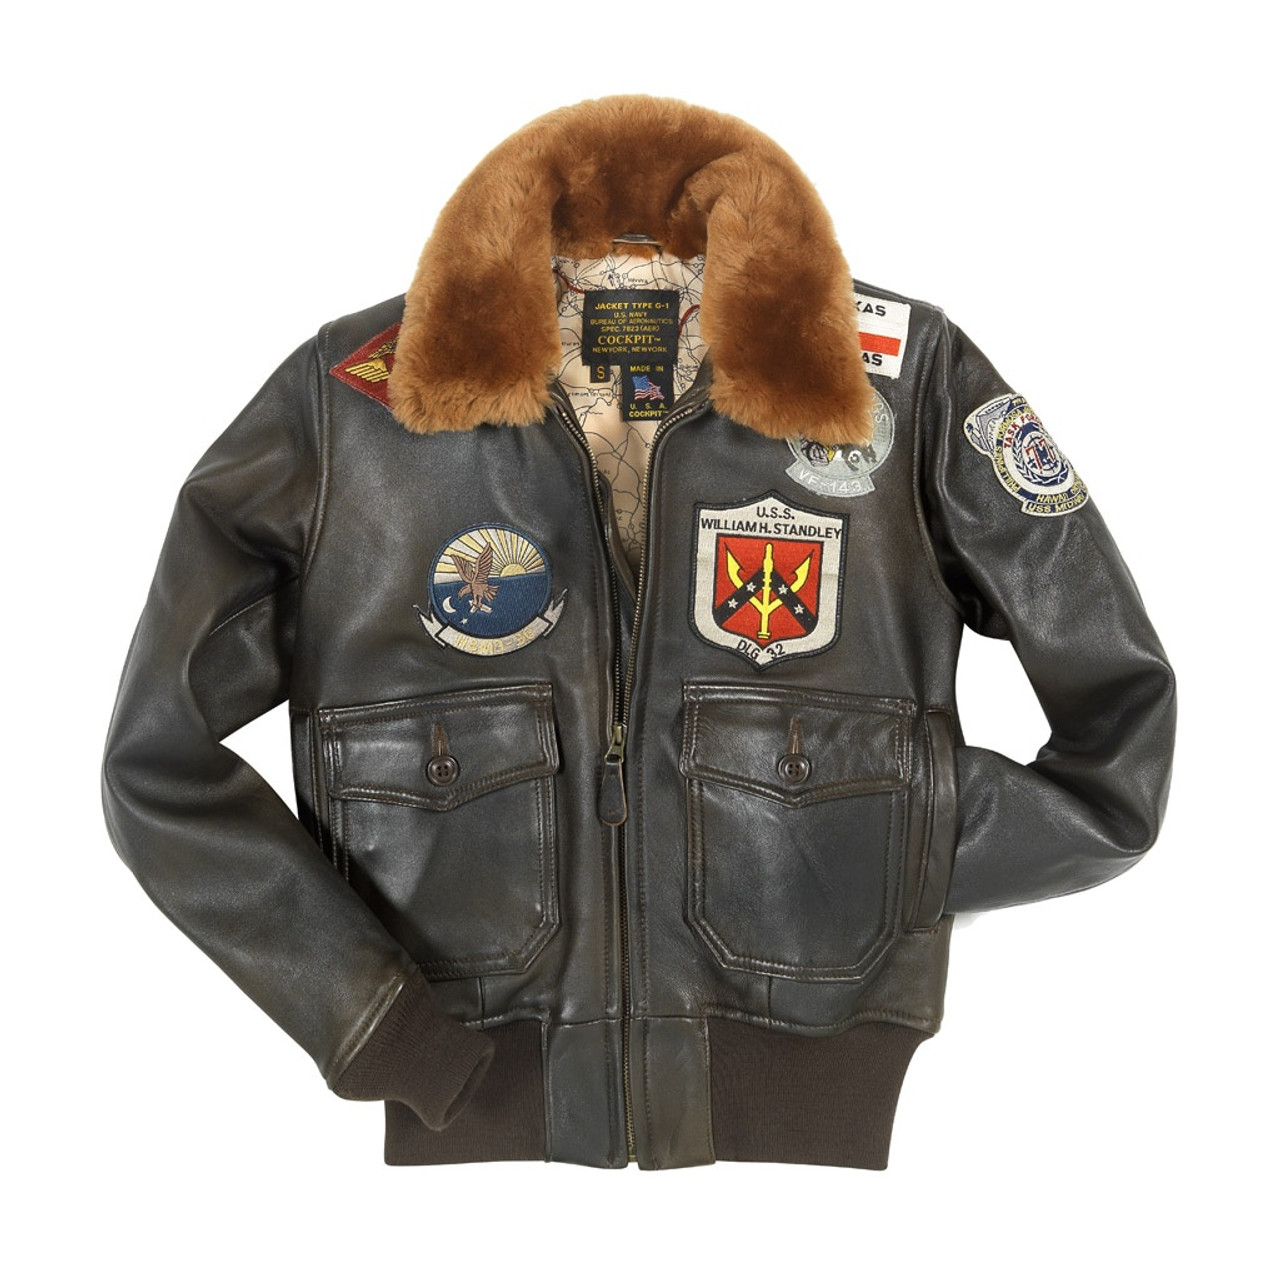 Cockpit USA Women's Top Gun Flight Jacket Brown With Patches USA Made